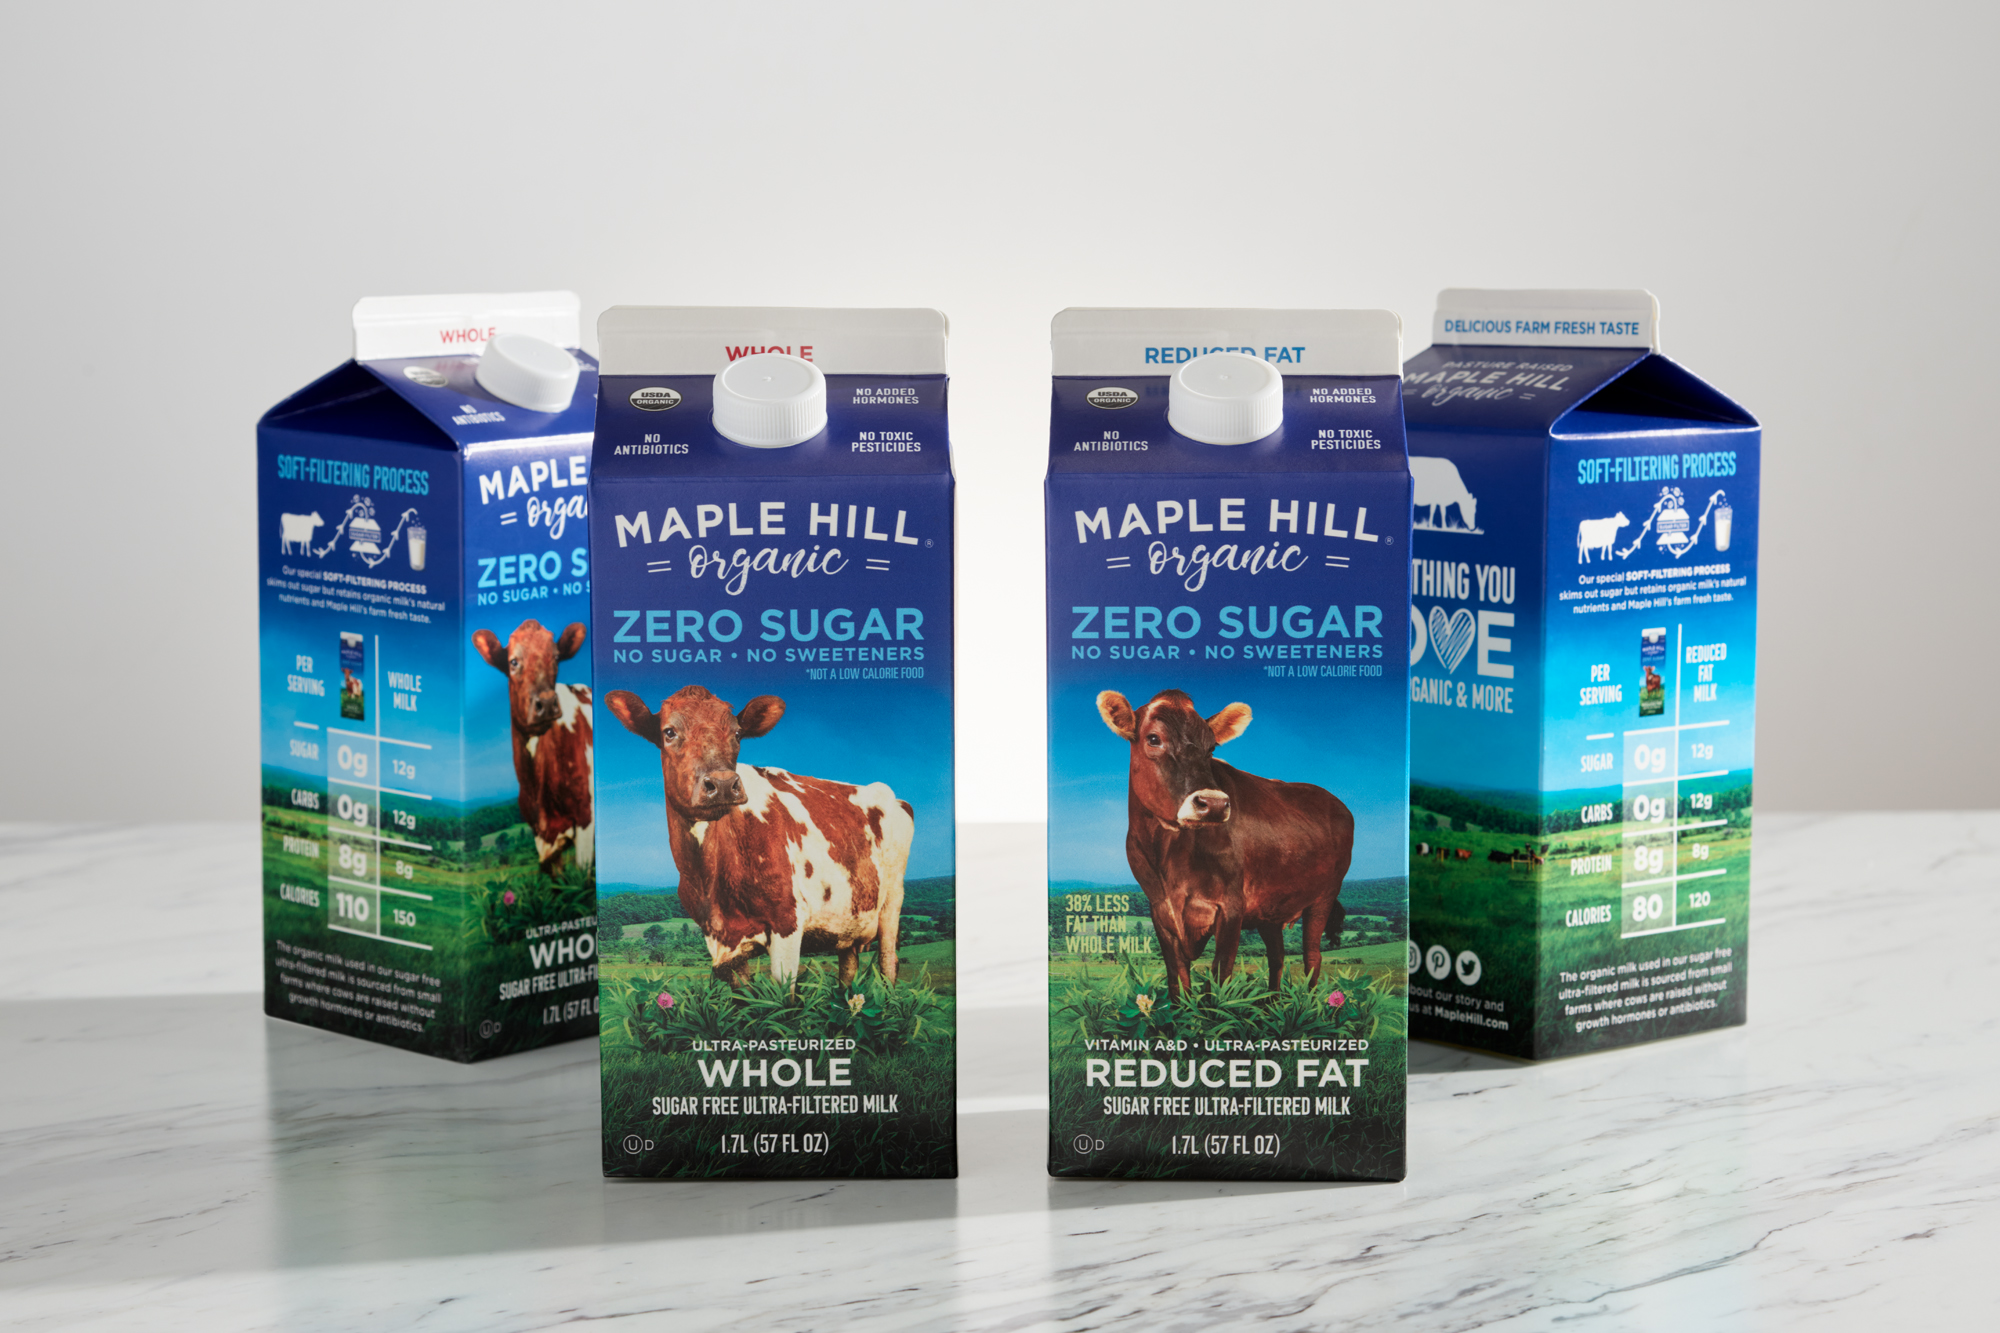 Four cartons of Zero Sugar Organic Milk from Maple Hill front and side of cartons shown